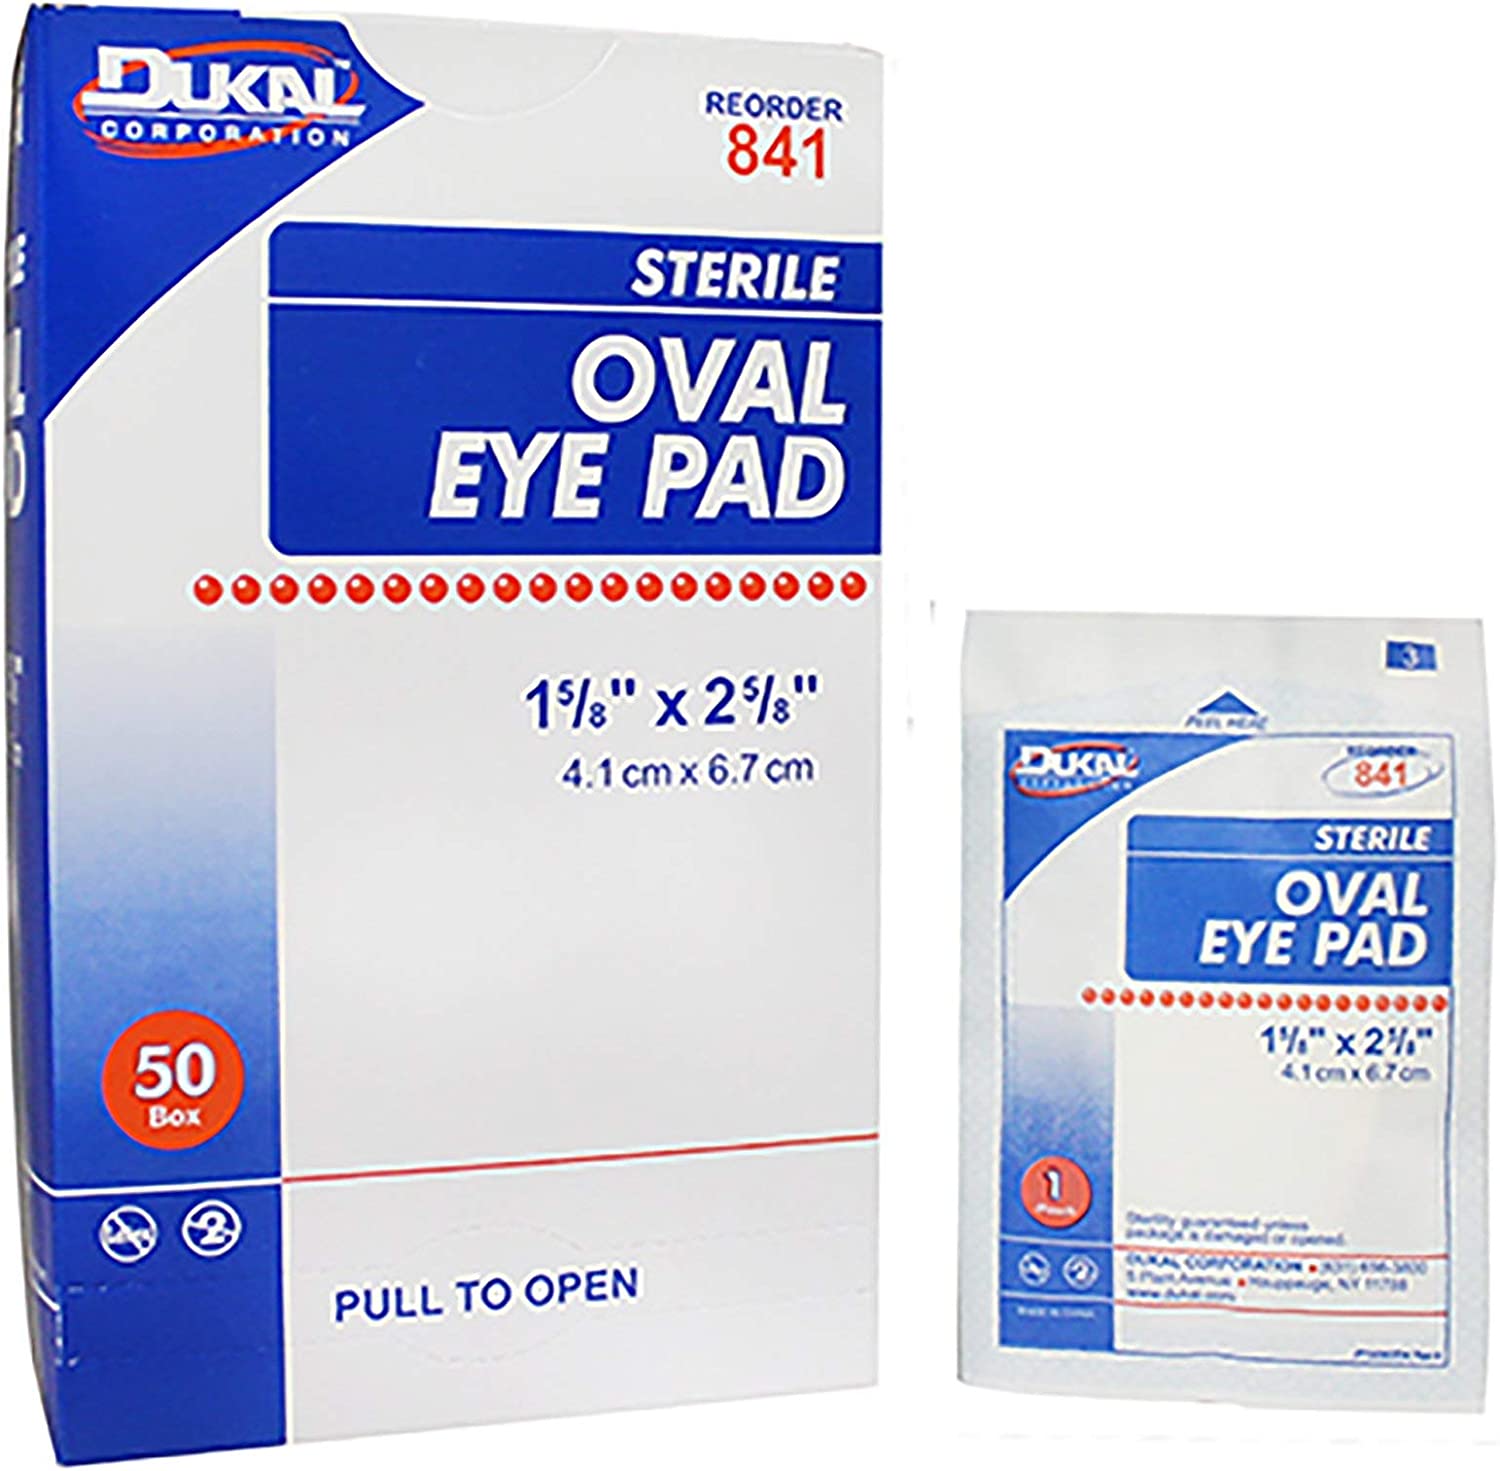  Dukal Eye Pads. Pack of 50 Sterile Pads for Eye Protection.  Conforming Eye Pads 2 1/8 x 2 5/8. Oval Cotton Eye Pads with Thick Cotton  Filler. Medical Dressing Pads for